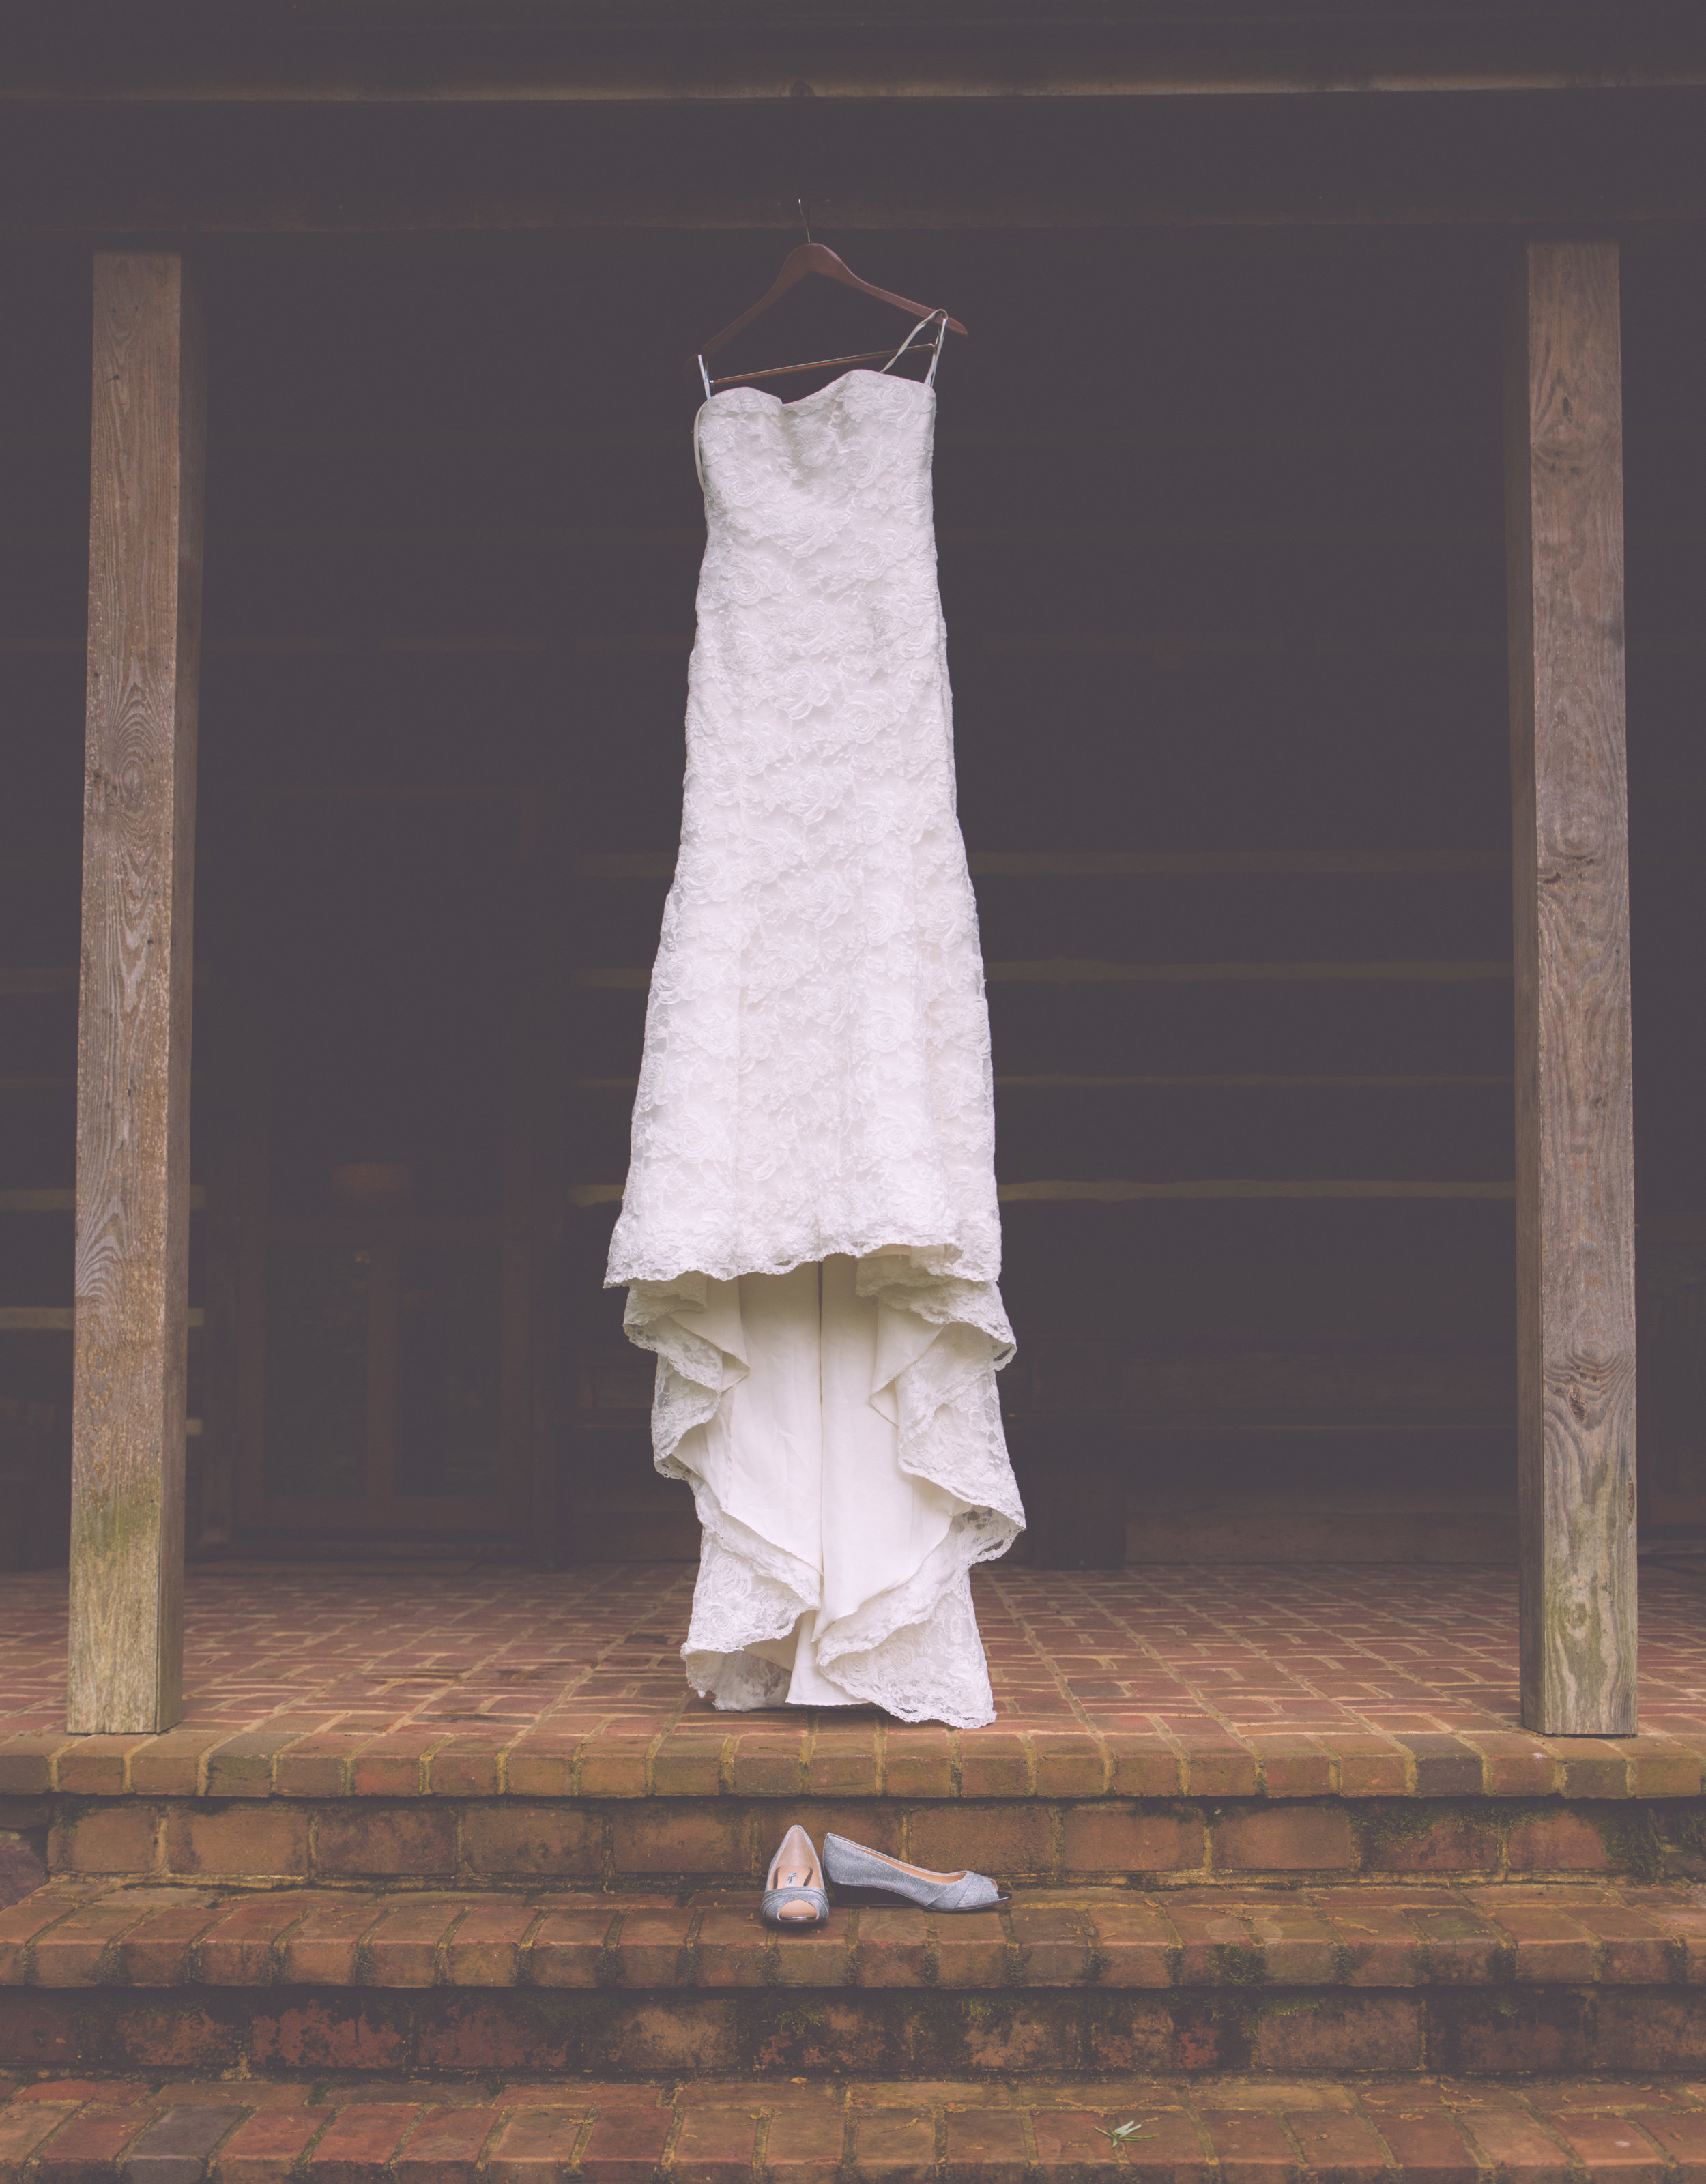  Brides Dress and shoes hanging outside 